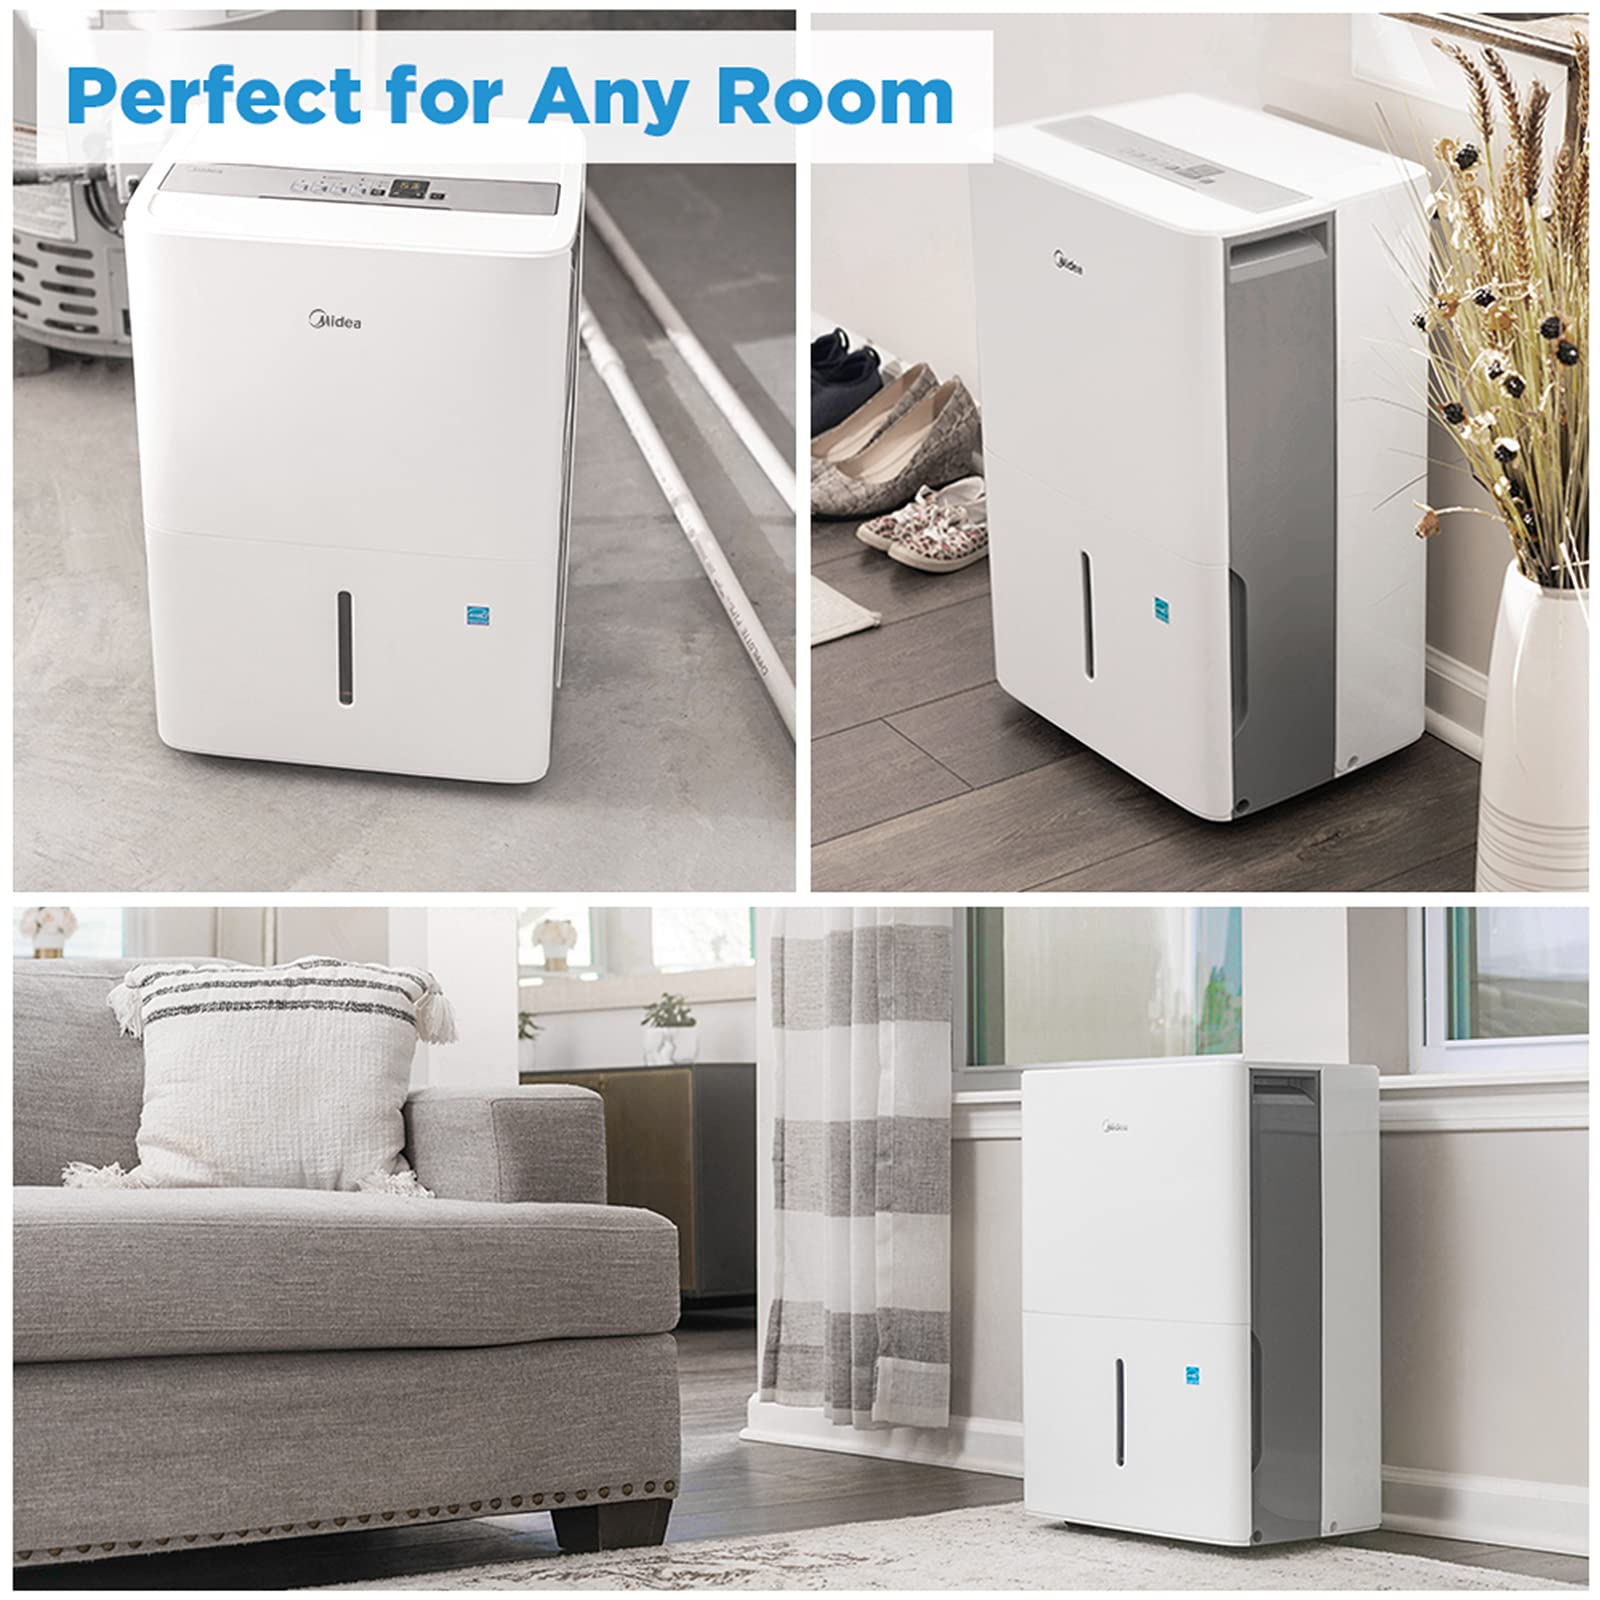 Midea 1,500 Sq. Ft. Energy Star Certified Dehumidifier With Reusable Air Filter 22 Pint - Ideal For Basements, Large & Medium Sized Rooms, And Bathrooms (White)